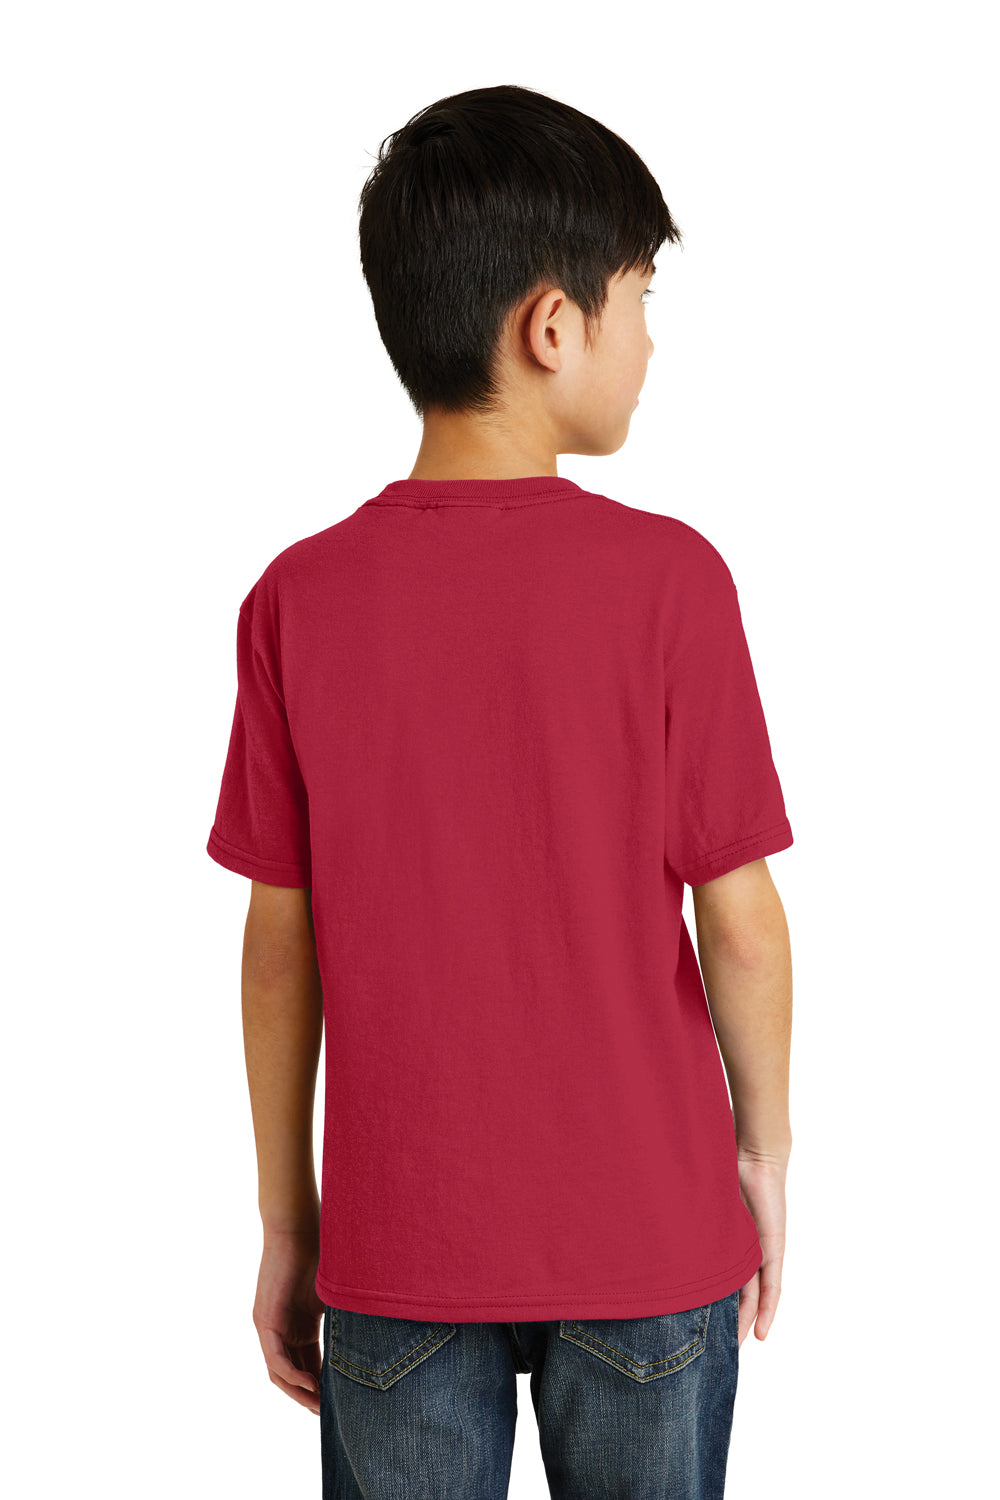 Port & Company PC55Y Youth Core Short Sleeve Crewneck T-Shirt Red Back